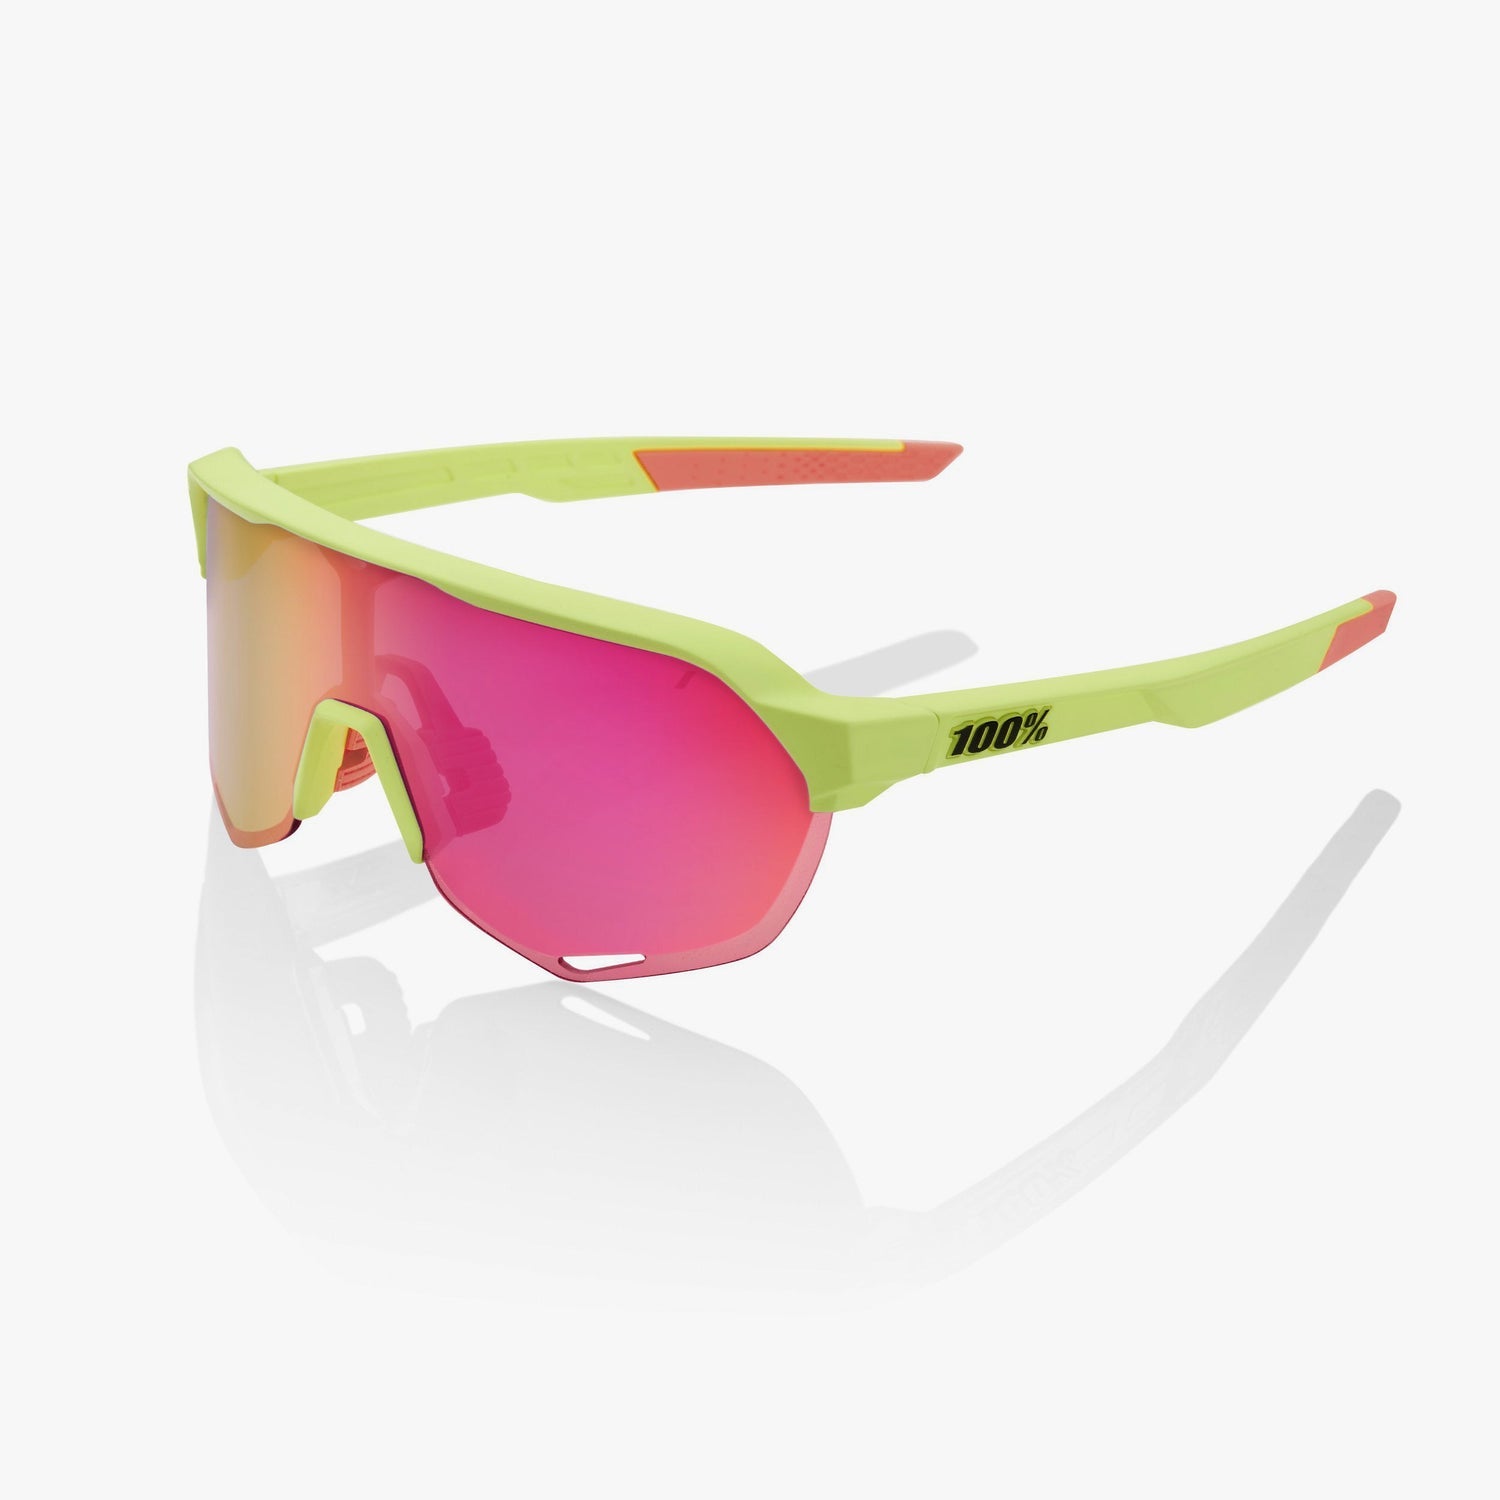 100% S3 Matte Washed Out Neon Yellow Purple Multilayer Mirror Lens